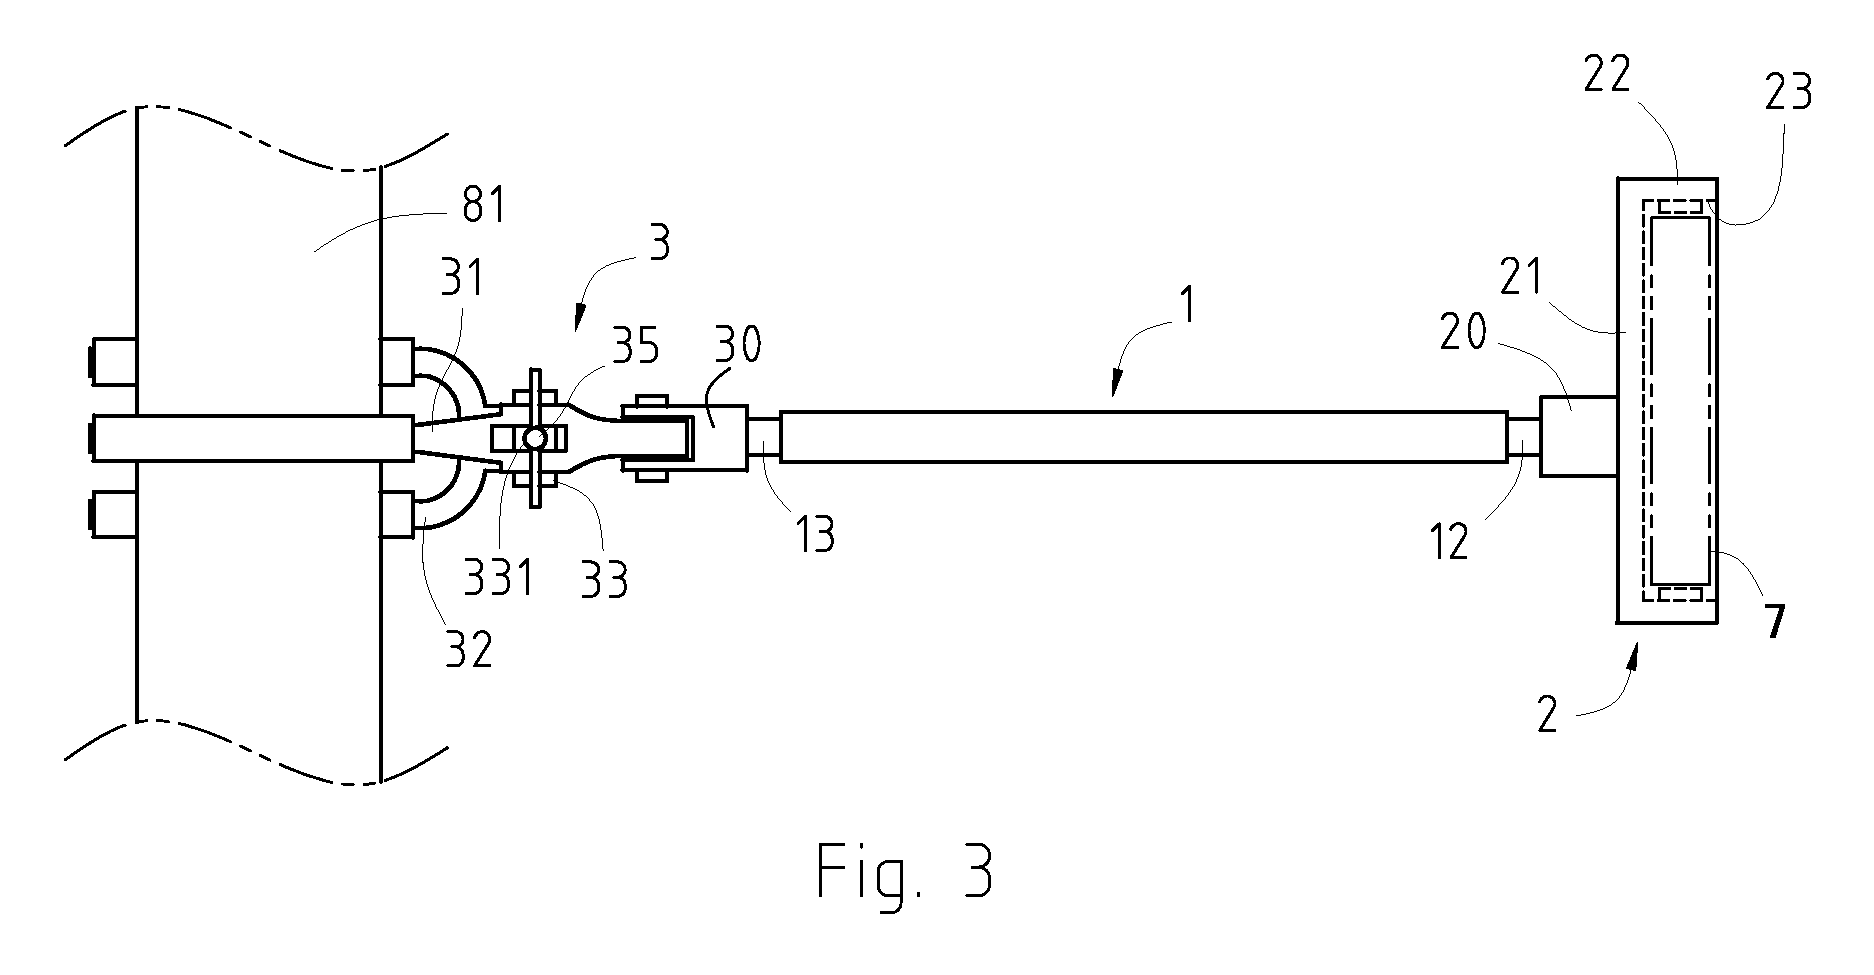 Extension rod device working with fixer for handheld, portable, mobile devices